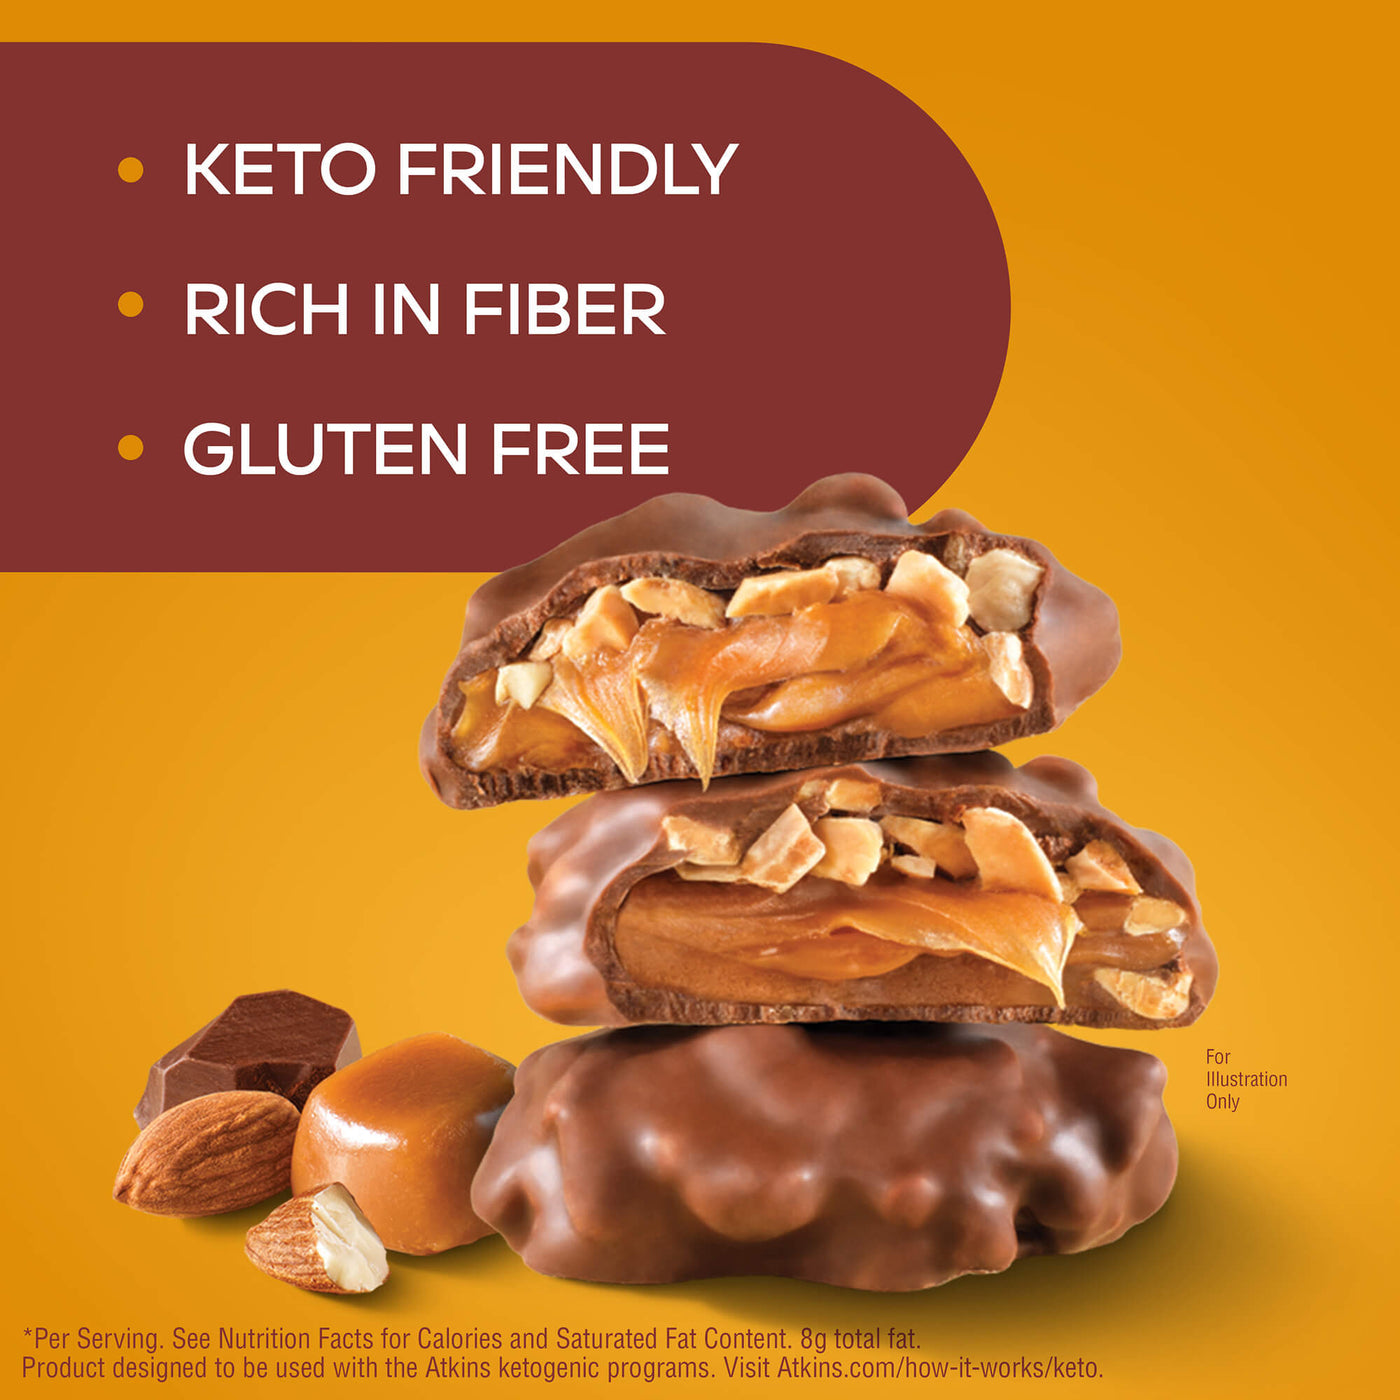 Caramel Almond Clusters. Keto friendly. Rich in fiber. Gluten Free. Per serving. See Nutrition Facts for calories and saturated fat content, 8g total fat. Product designer to be used with the Atkins ketogenic programs. Visit Atkins.com/how-it-works/keto.